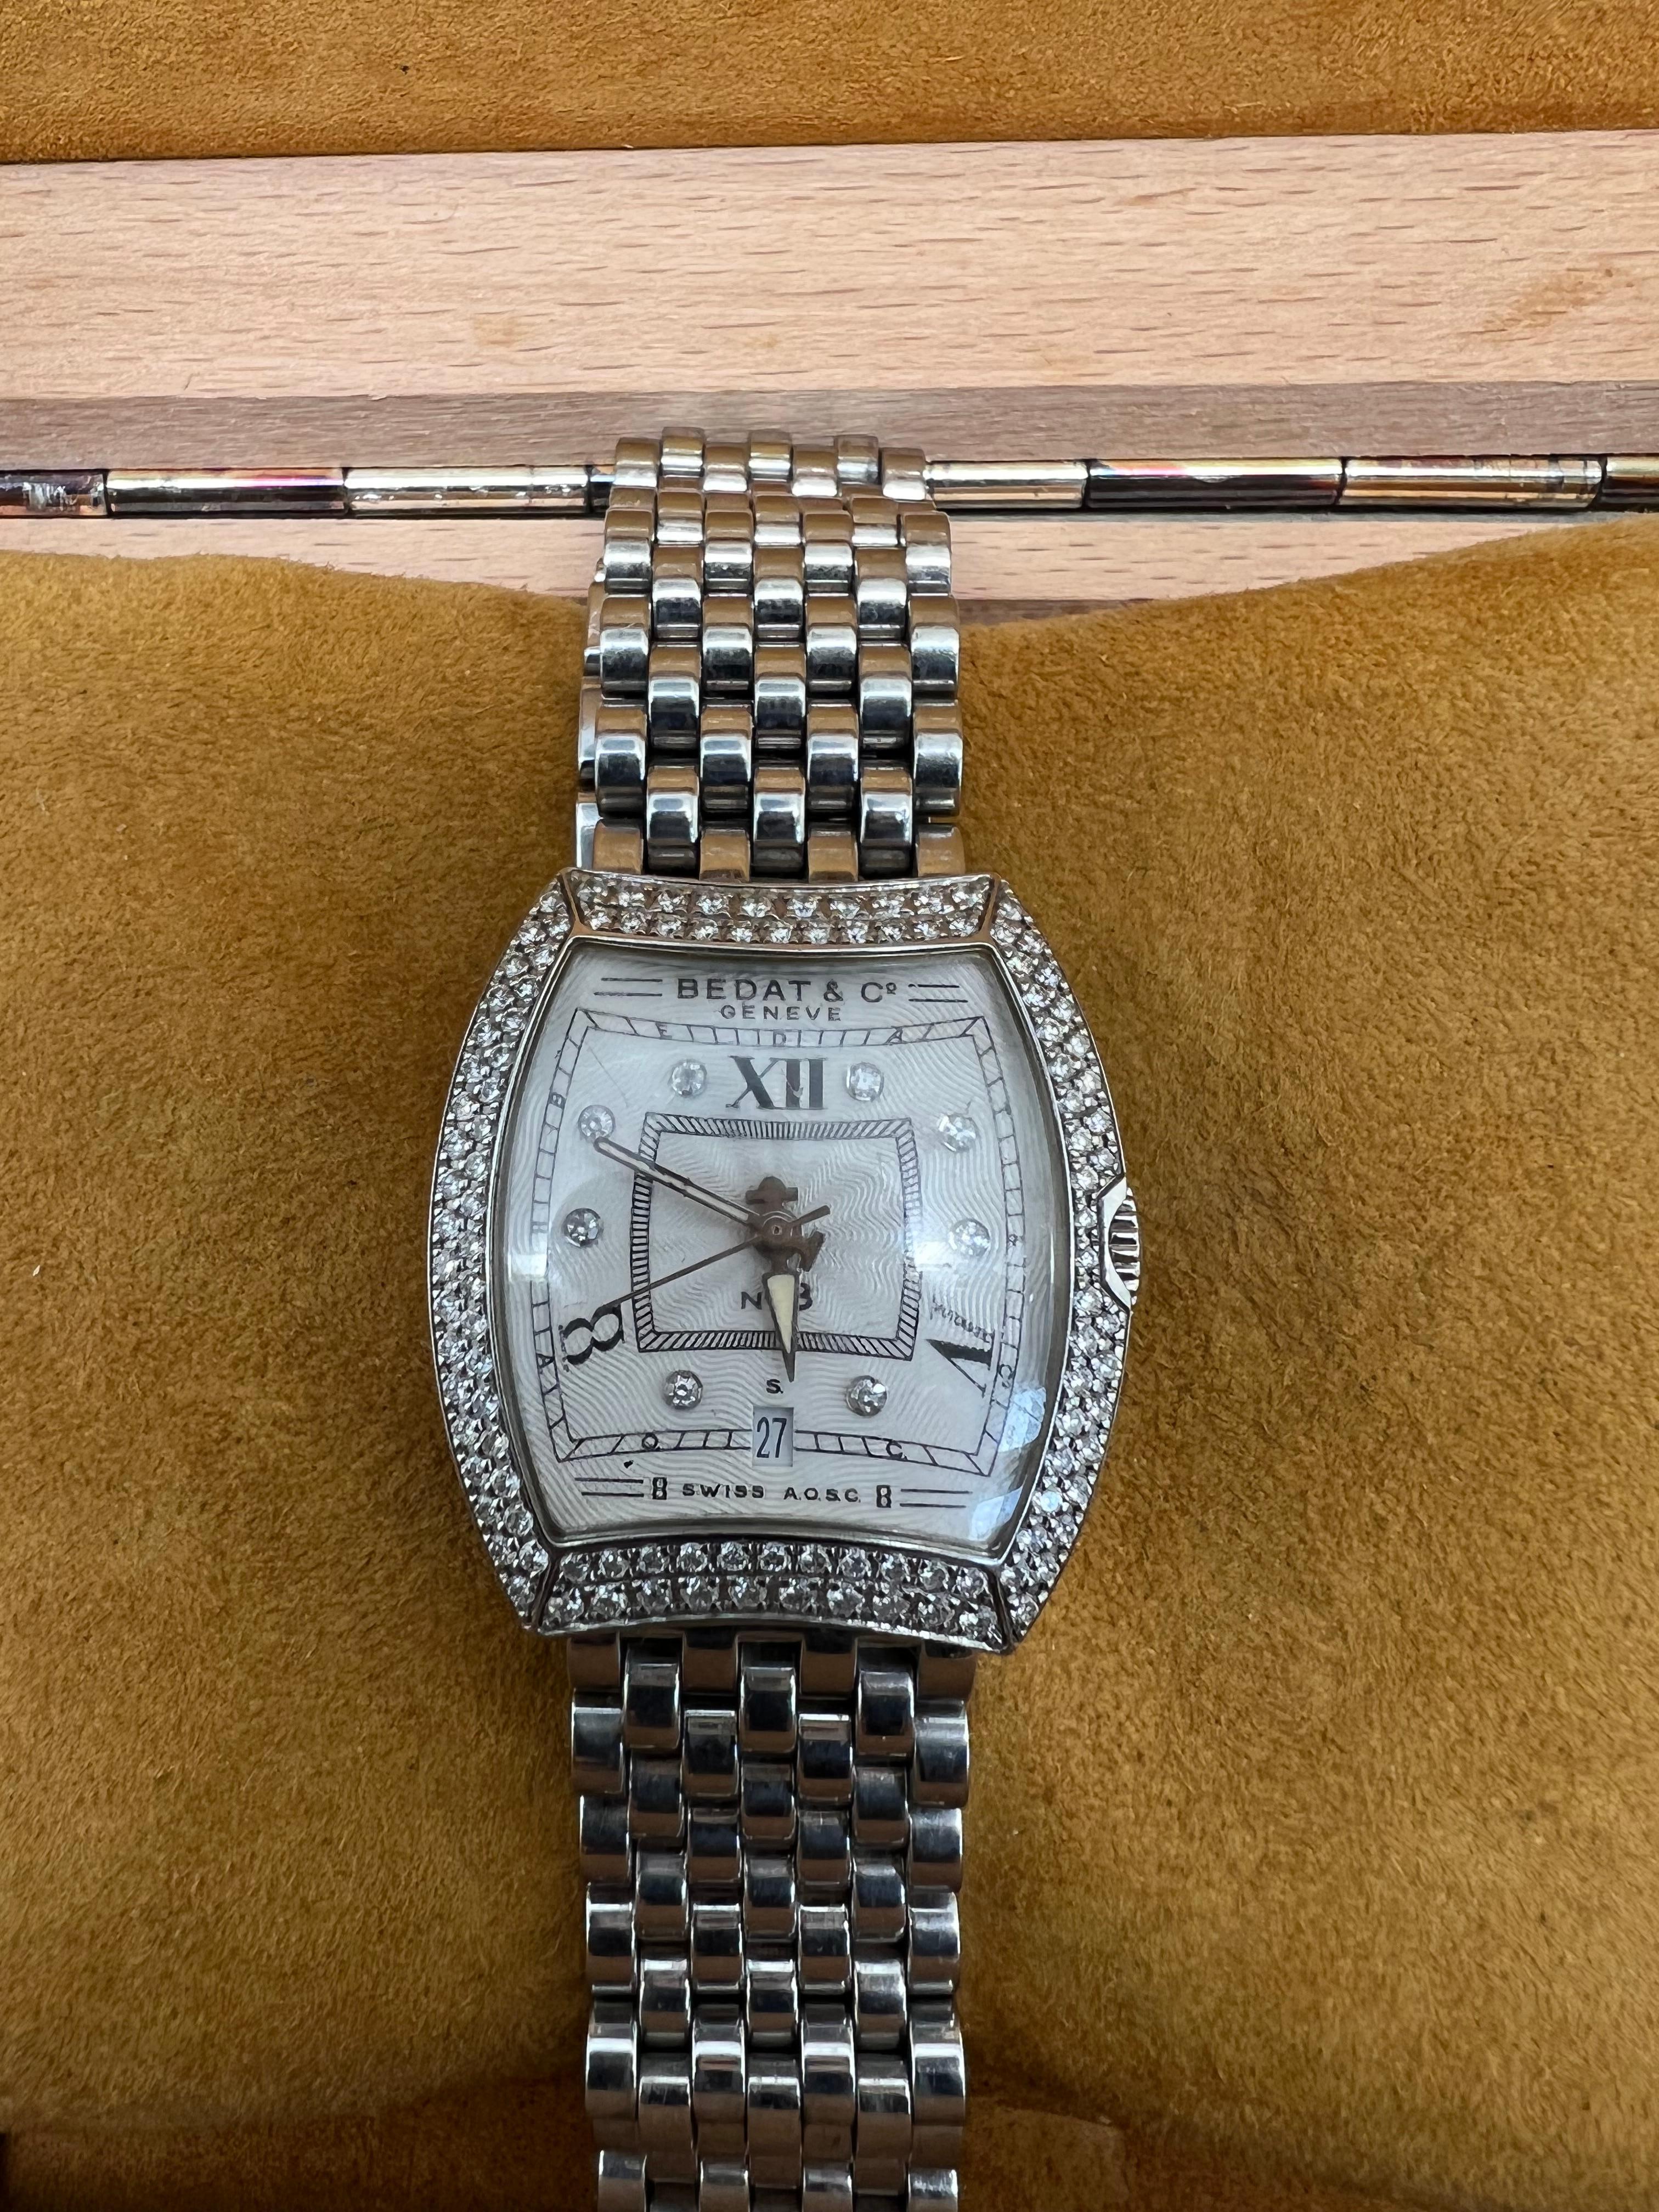 Bedat & Co. ladies wrist watch reference 314 No. 3 with all original parts. Tonneau-shaped 28mm case fitted with 113 round diamonds (0.95 carats). Textured sunburst guilloche dial with blue hands, Roman numeral hour-markers, and meticulously crafted